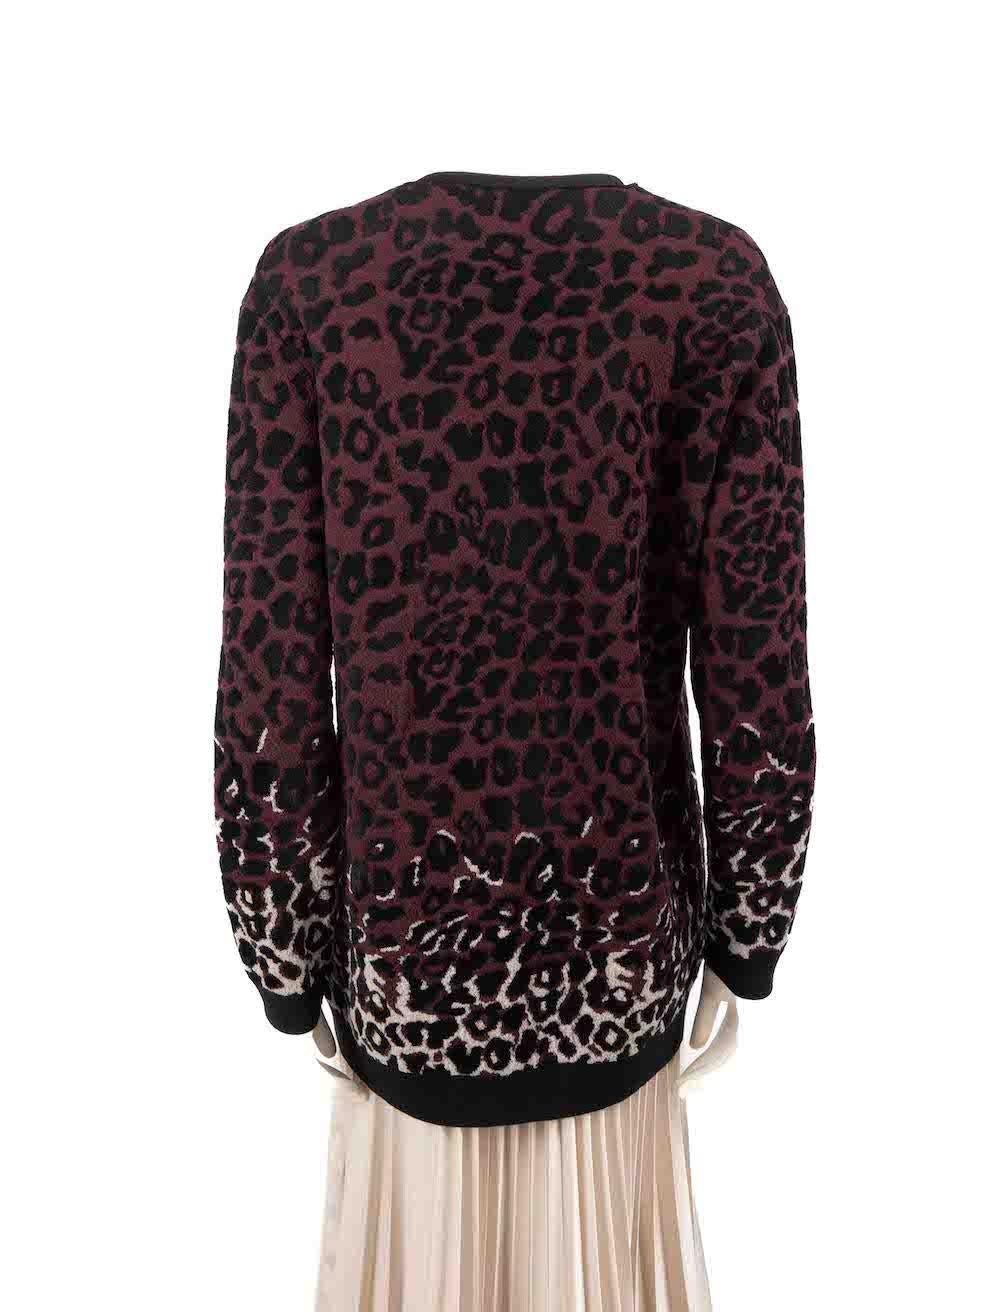 Lanvin Purple Wool Leopard Jacquard Cardigan Size M In Excellent Condition For Sale In London, GB